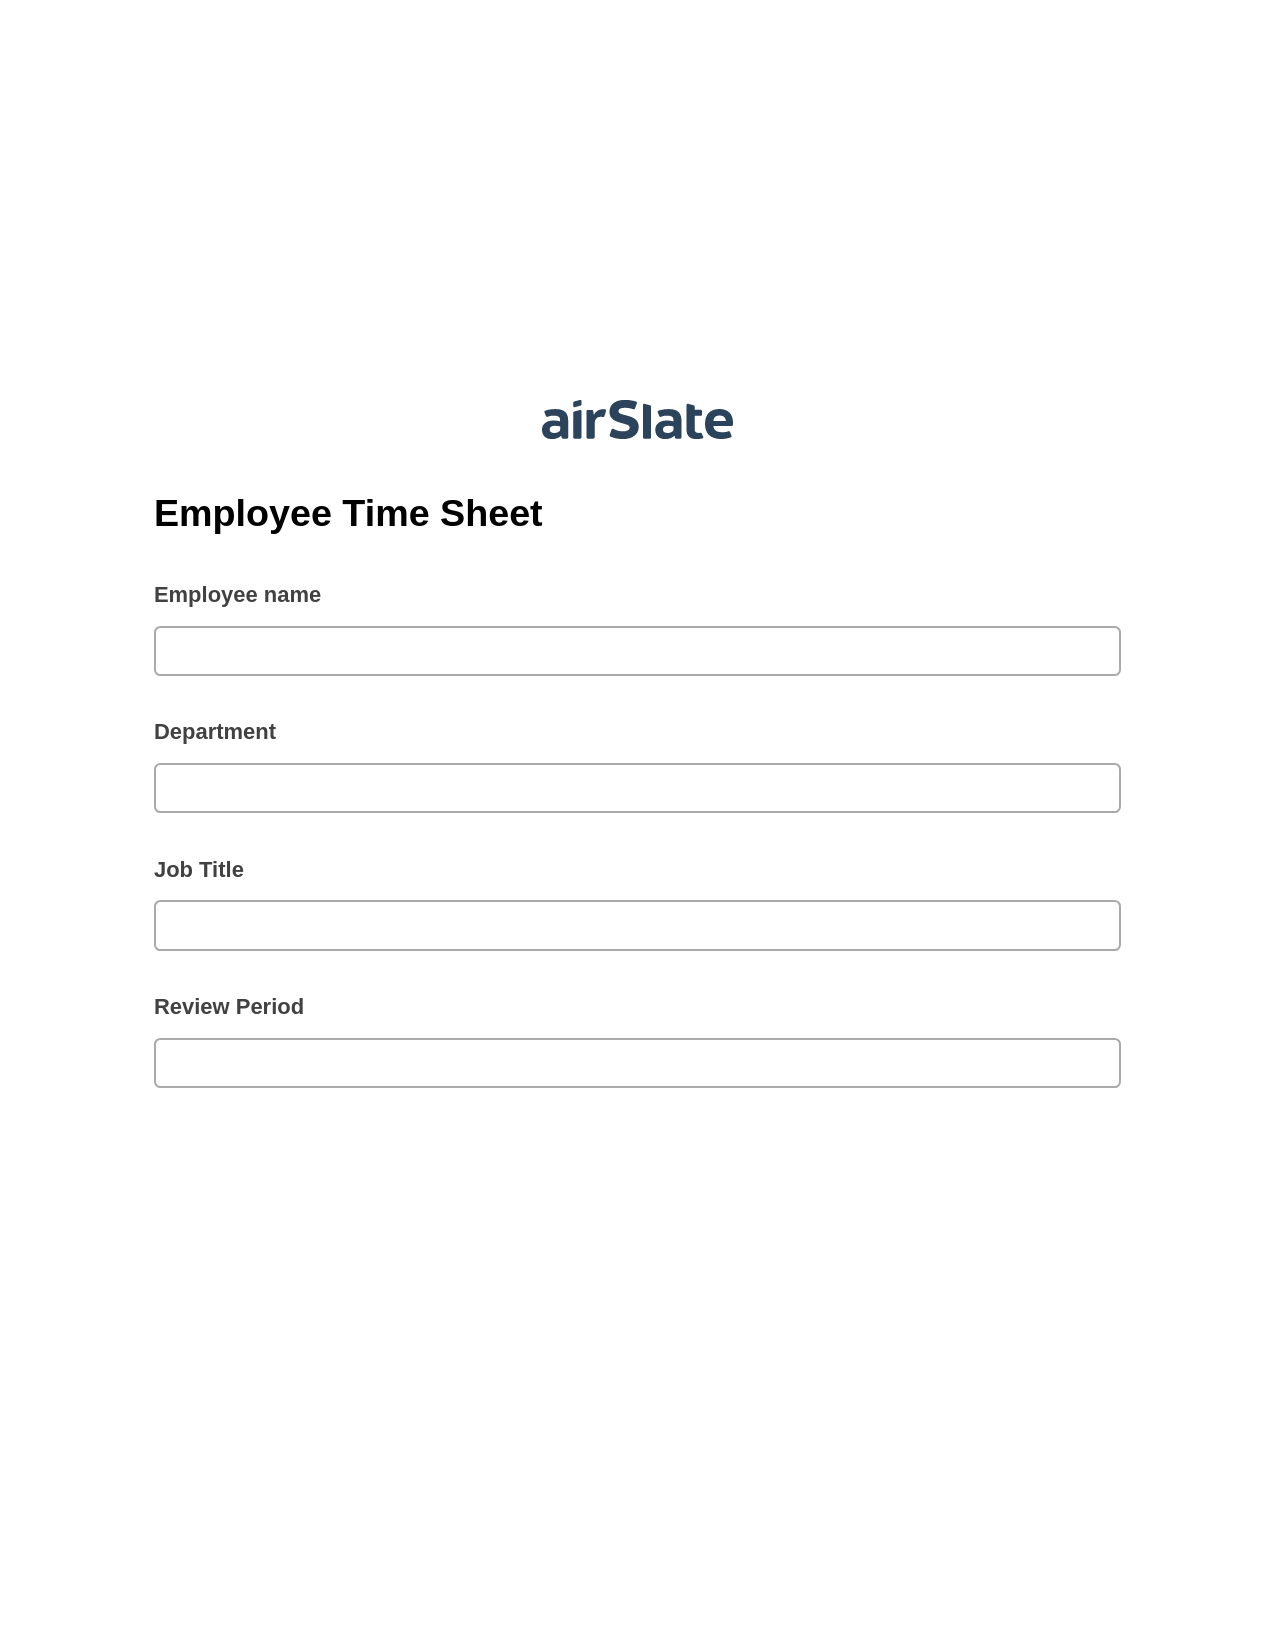 Multirole Employee Time Sheet Prefill from NetSuite records, Create slate addon, Archive to Google Drive Bot